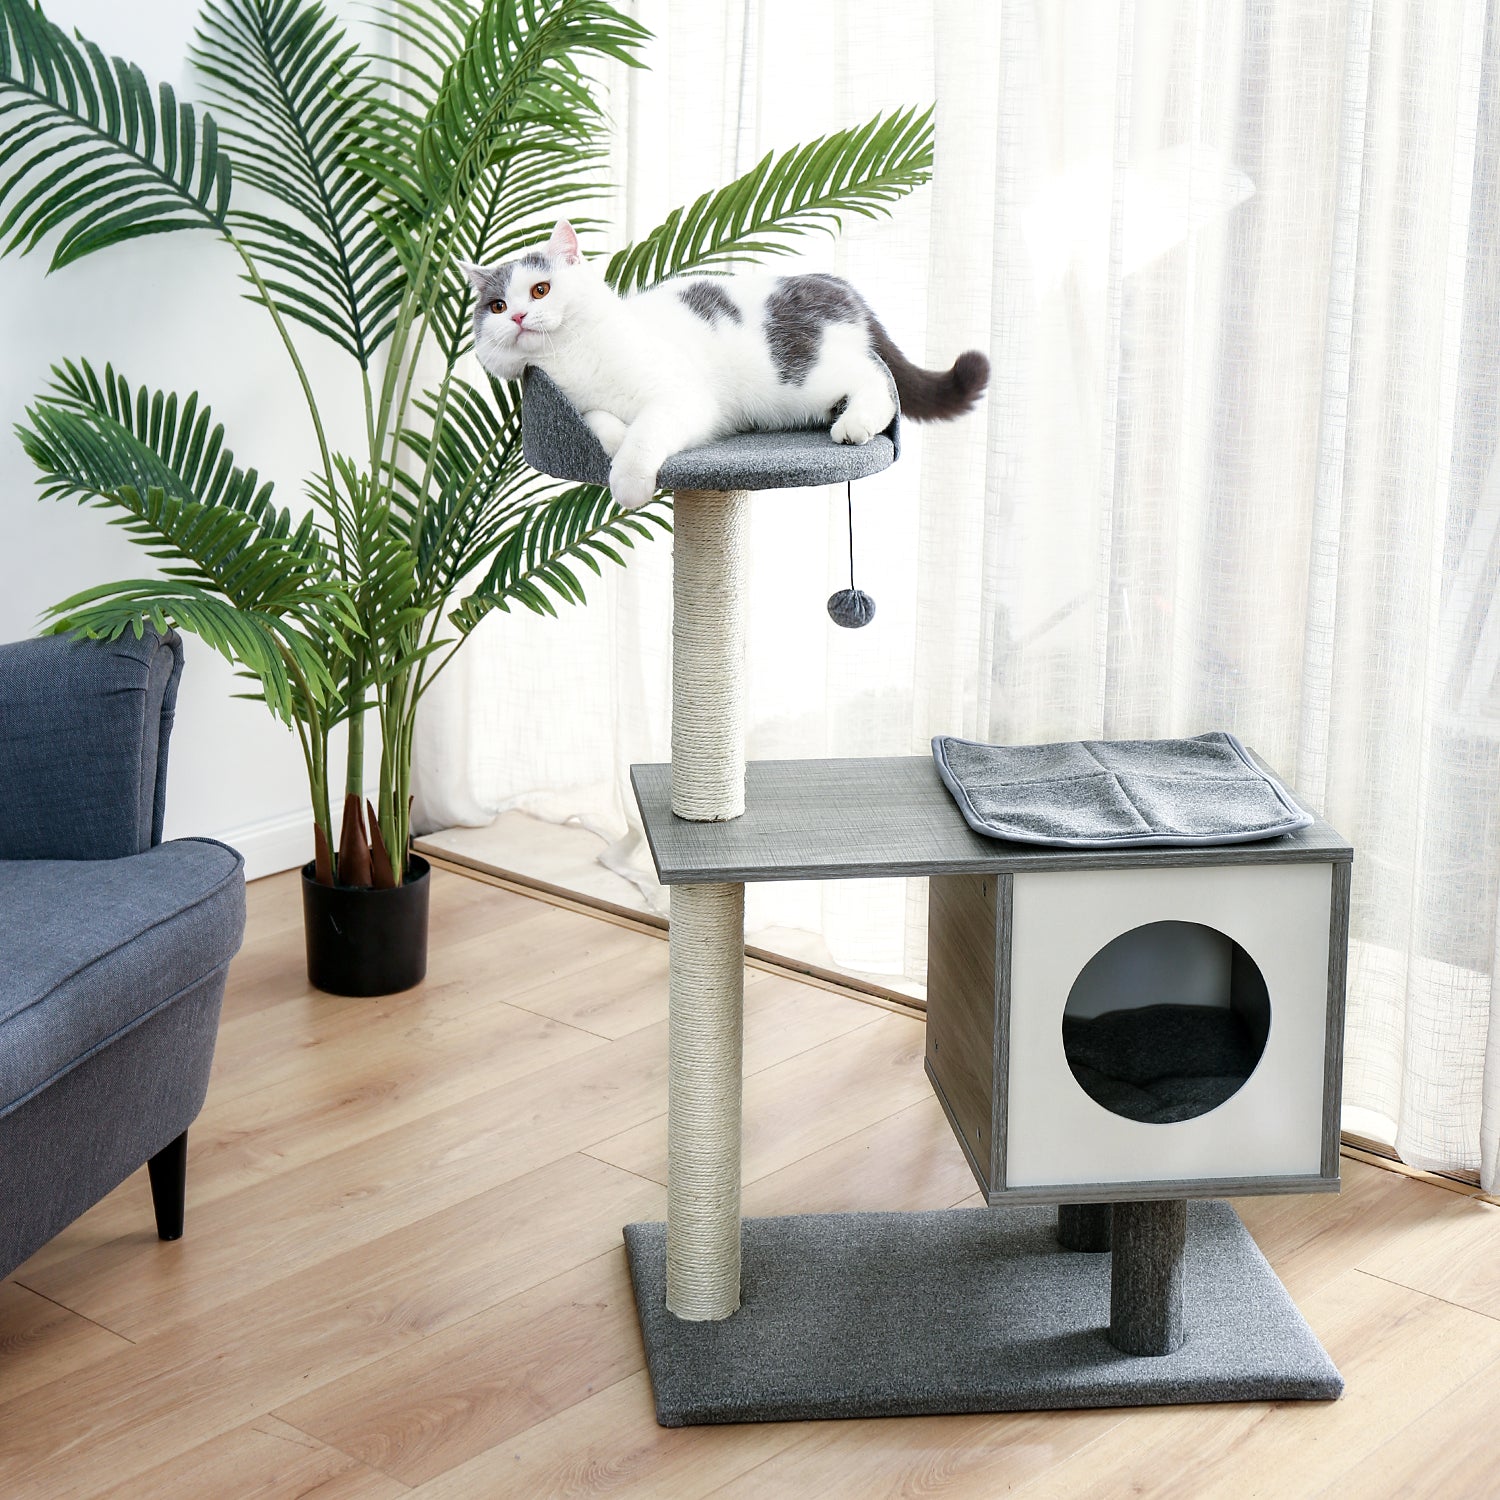 Modern Cat Tree Cat Tower Featuring with Sisal-Covered Scratching Posts, Spacious Condo and Large Perch Grey